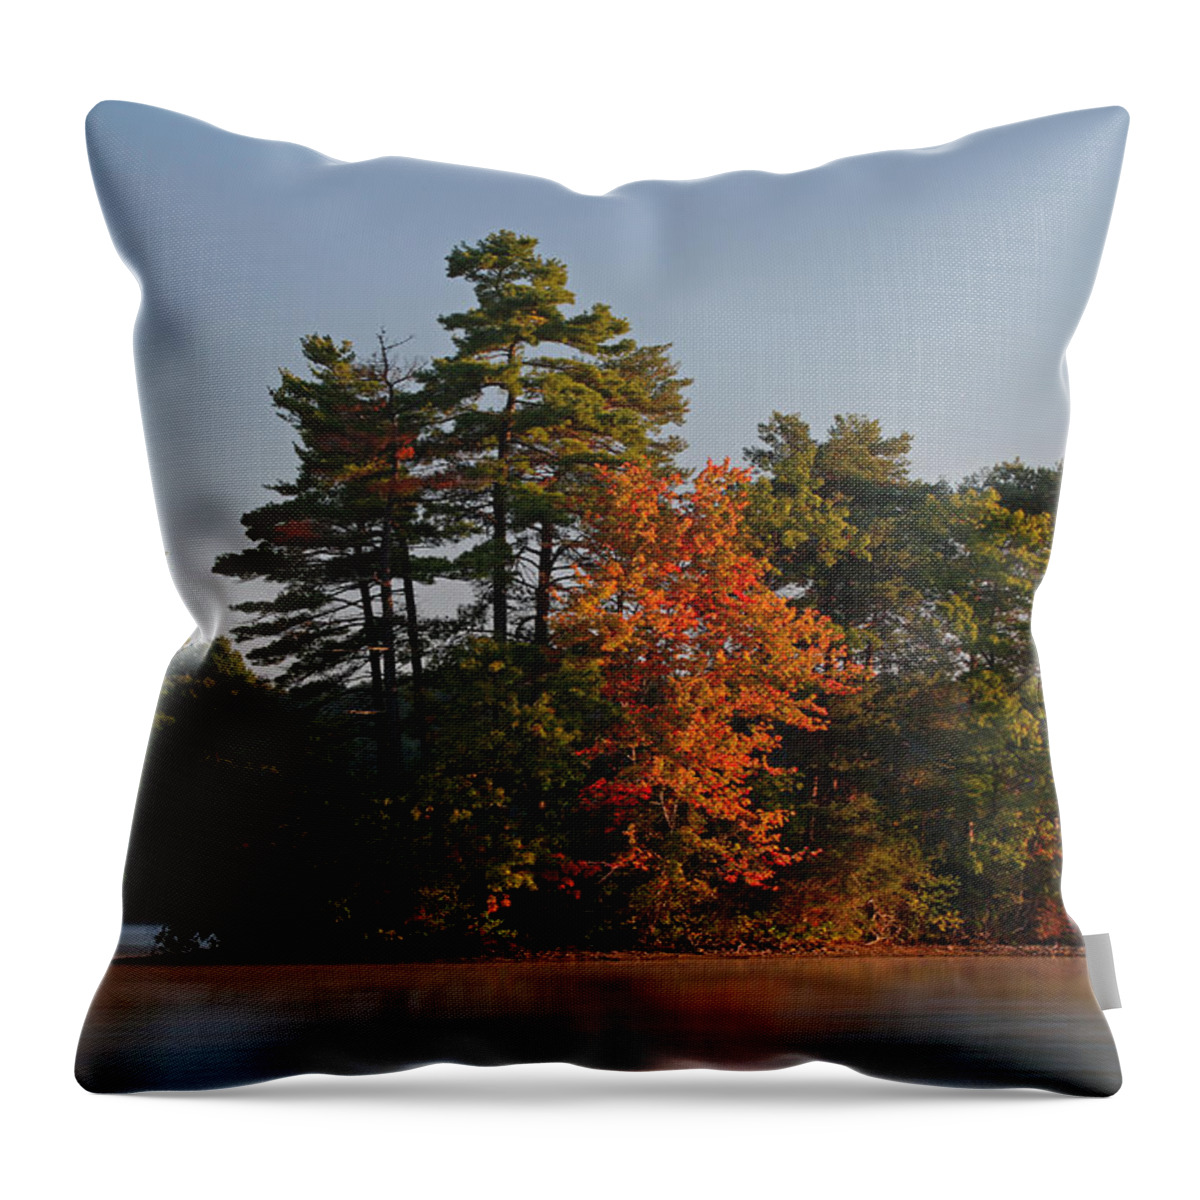 New England Throw Pillow featuring the photograph Massachusetts Lake Cochituate by Juergen Roth